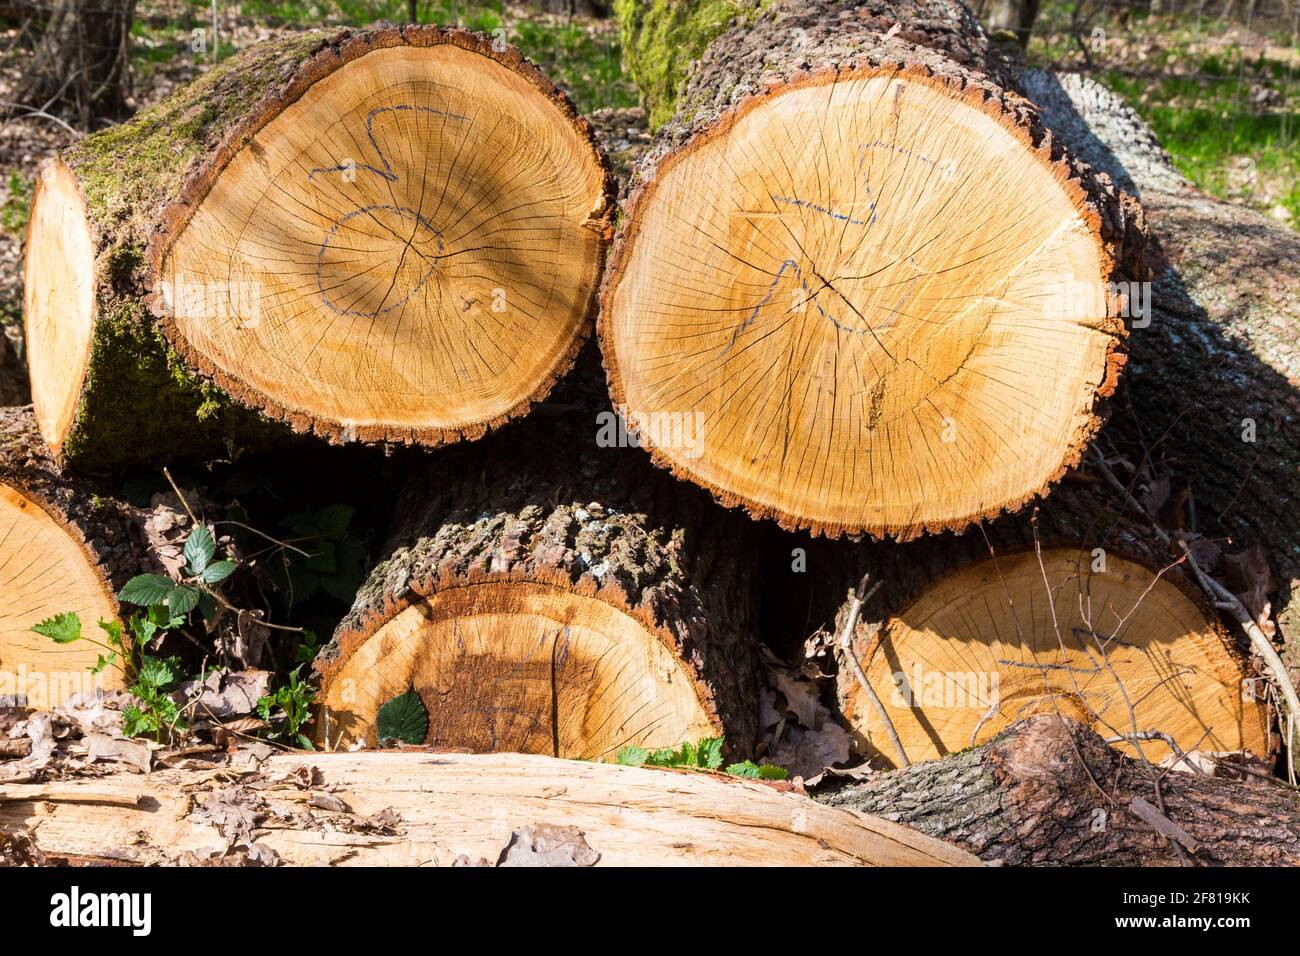 Cross section of cut down oak trunks with number marks, Soproni-hegyseg, Sopron, Hungary Stock Photo